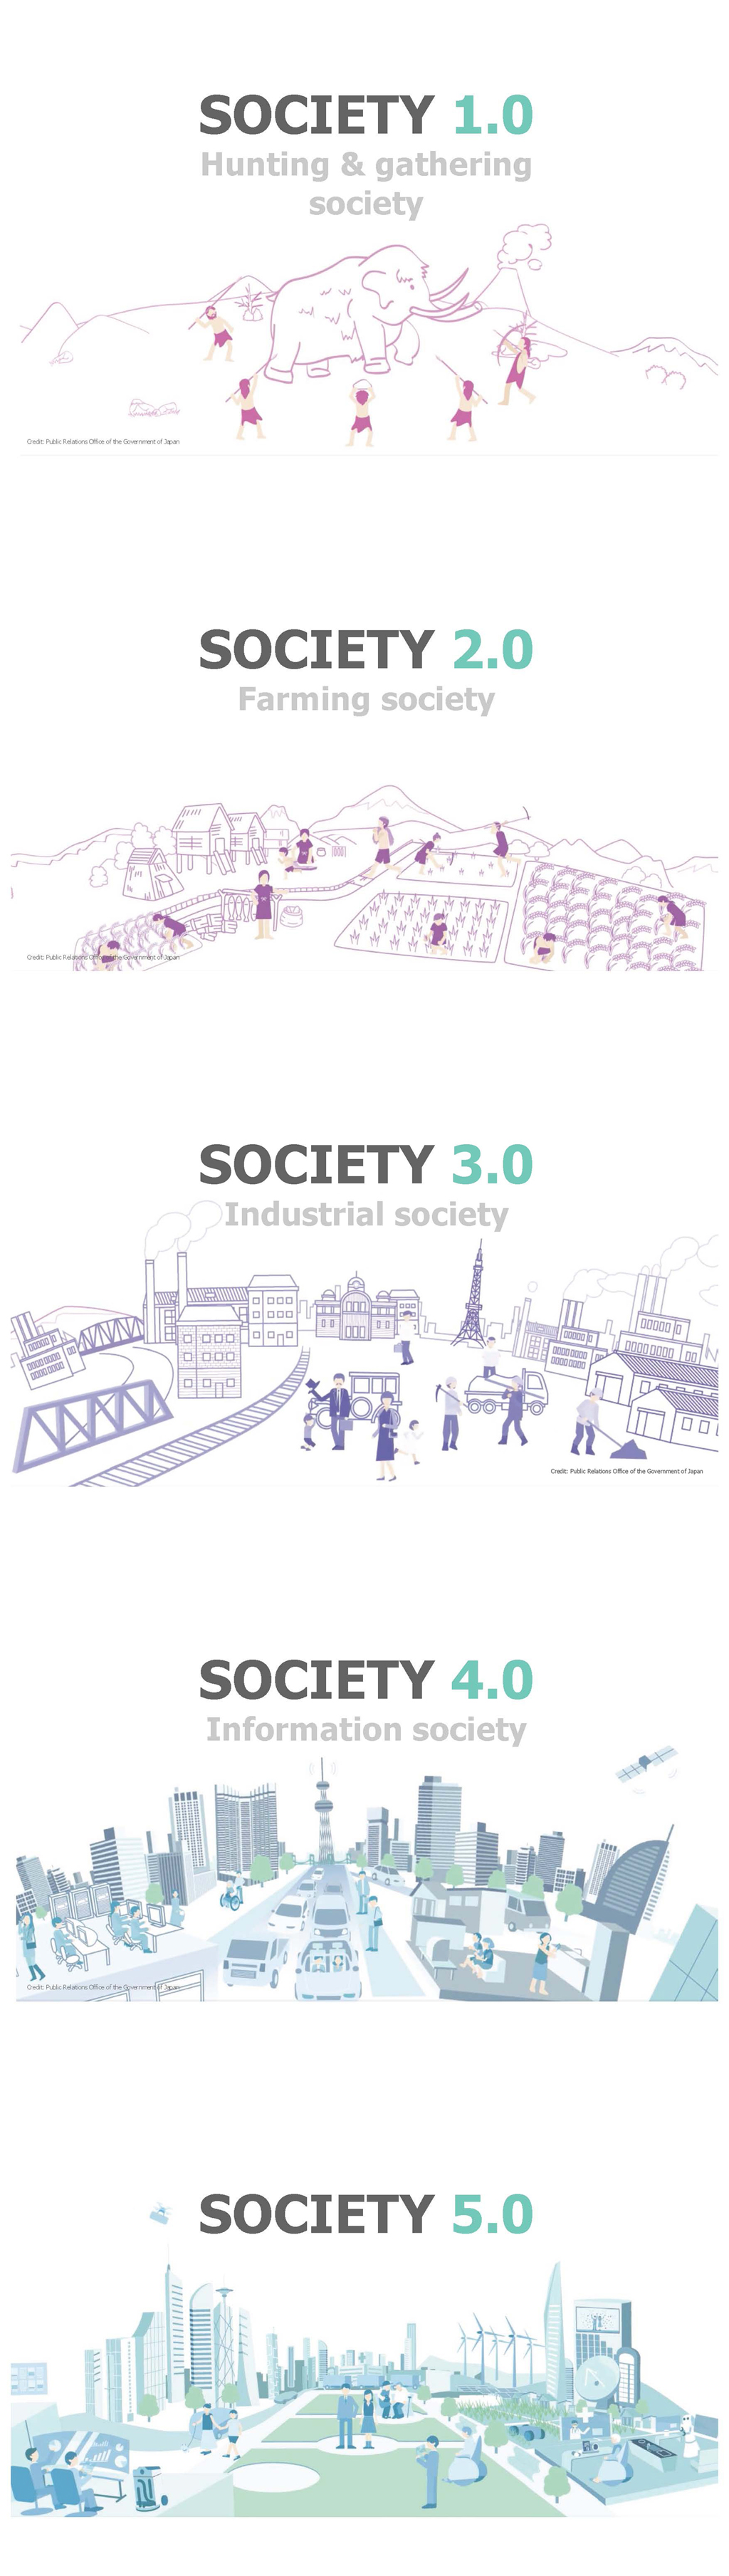 Following the hunting society (Society 1.0), the agricultural society (Society 2.0), the industrial society (Society 3.0), and the information society (Society 4.0), the far-reaching policies of Society 5.0 propose a new transformation of contemporary ways of life. Society 5.0 aims to resolve various modern social challenges by incorporating game-changing innovations such as the Internet of things (IoT), robotics, AI and big data into all industries and social activities. | japanhouselondon.uk